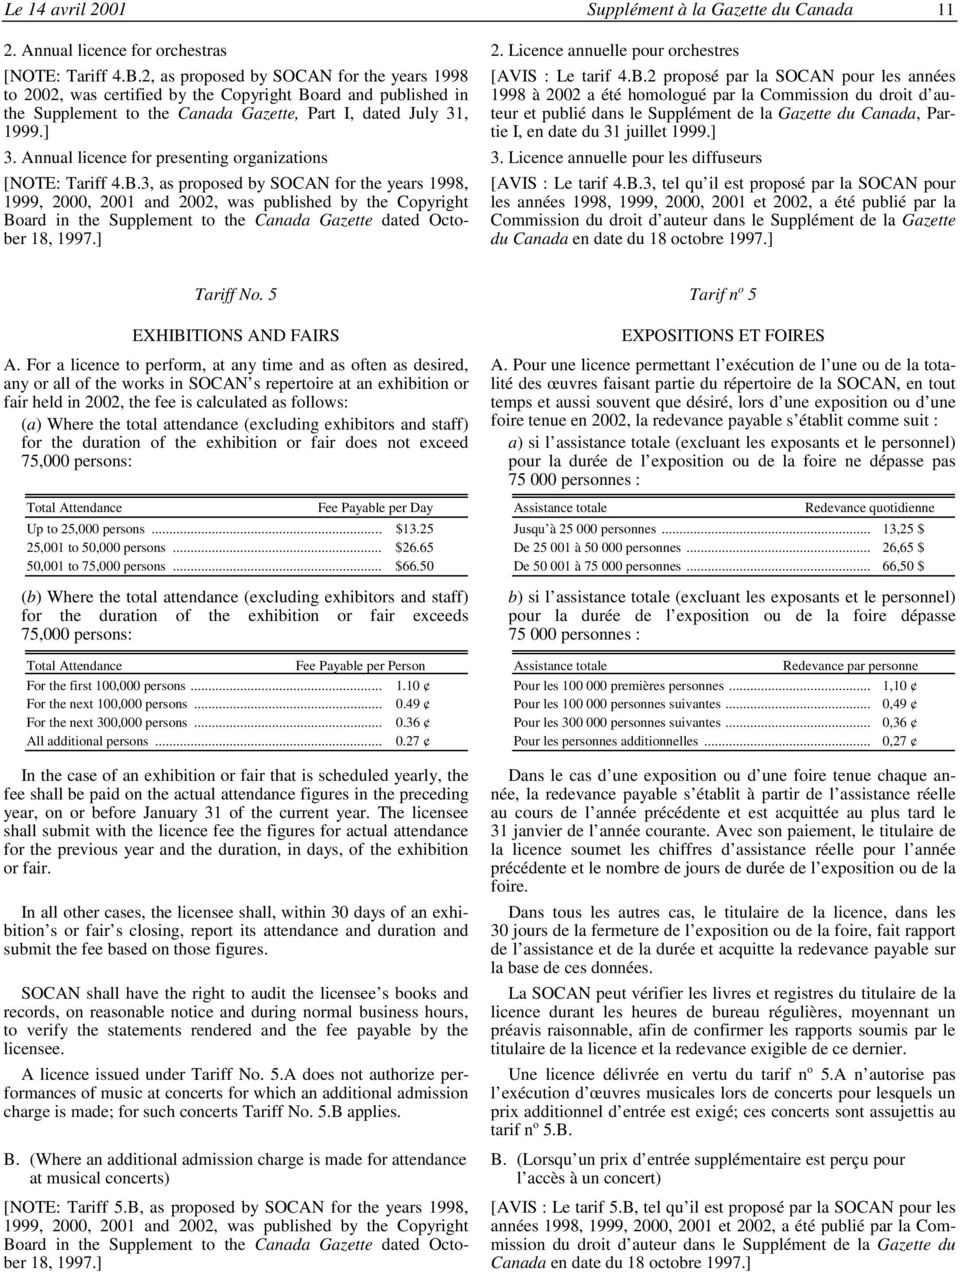 ard and published in the Supplement to the Canada Gazette, Part I, dated July 31, 1999.] [AVIS : Le tarif 4.B.